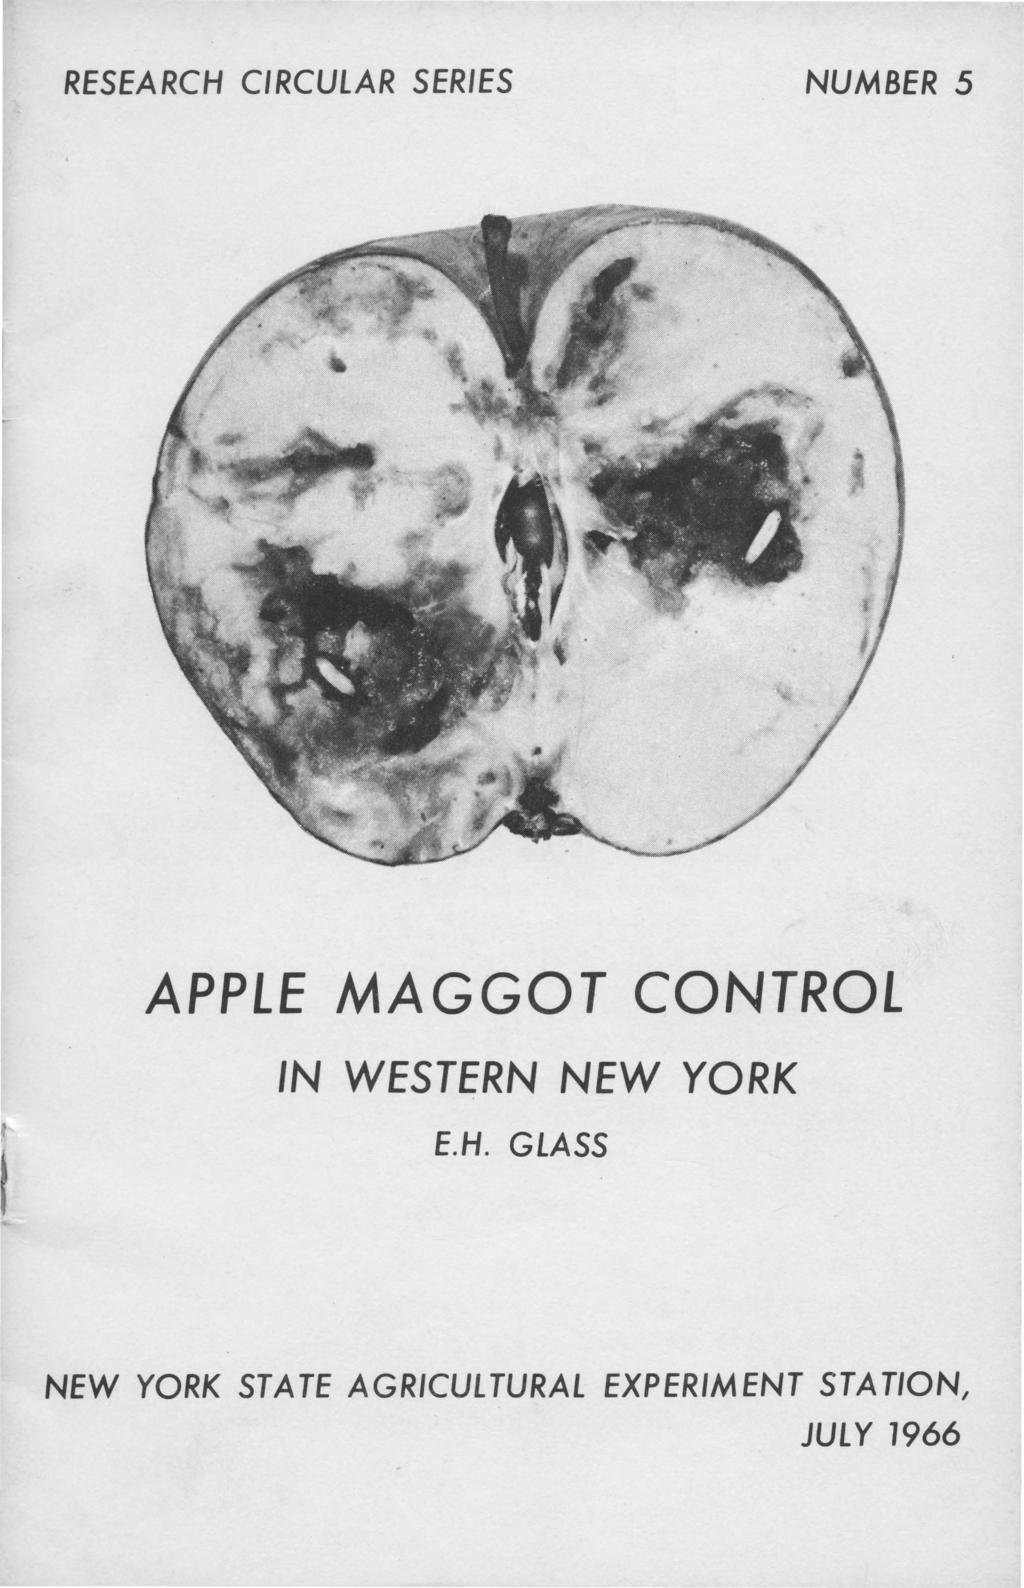 RESEARCH CIRCULAR SERIES NUMBER 5 APPLE MAGGOT CONTROL IN WESTERN NEW